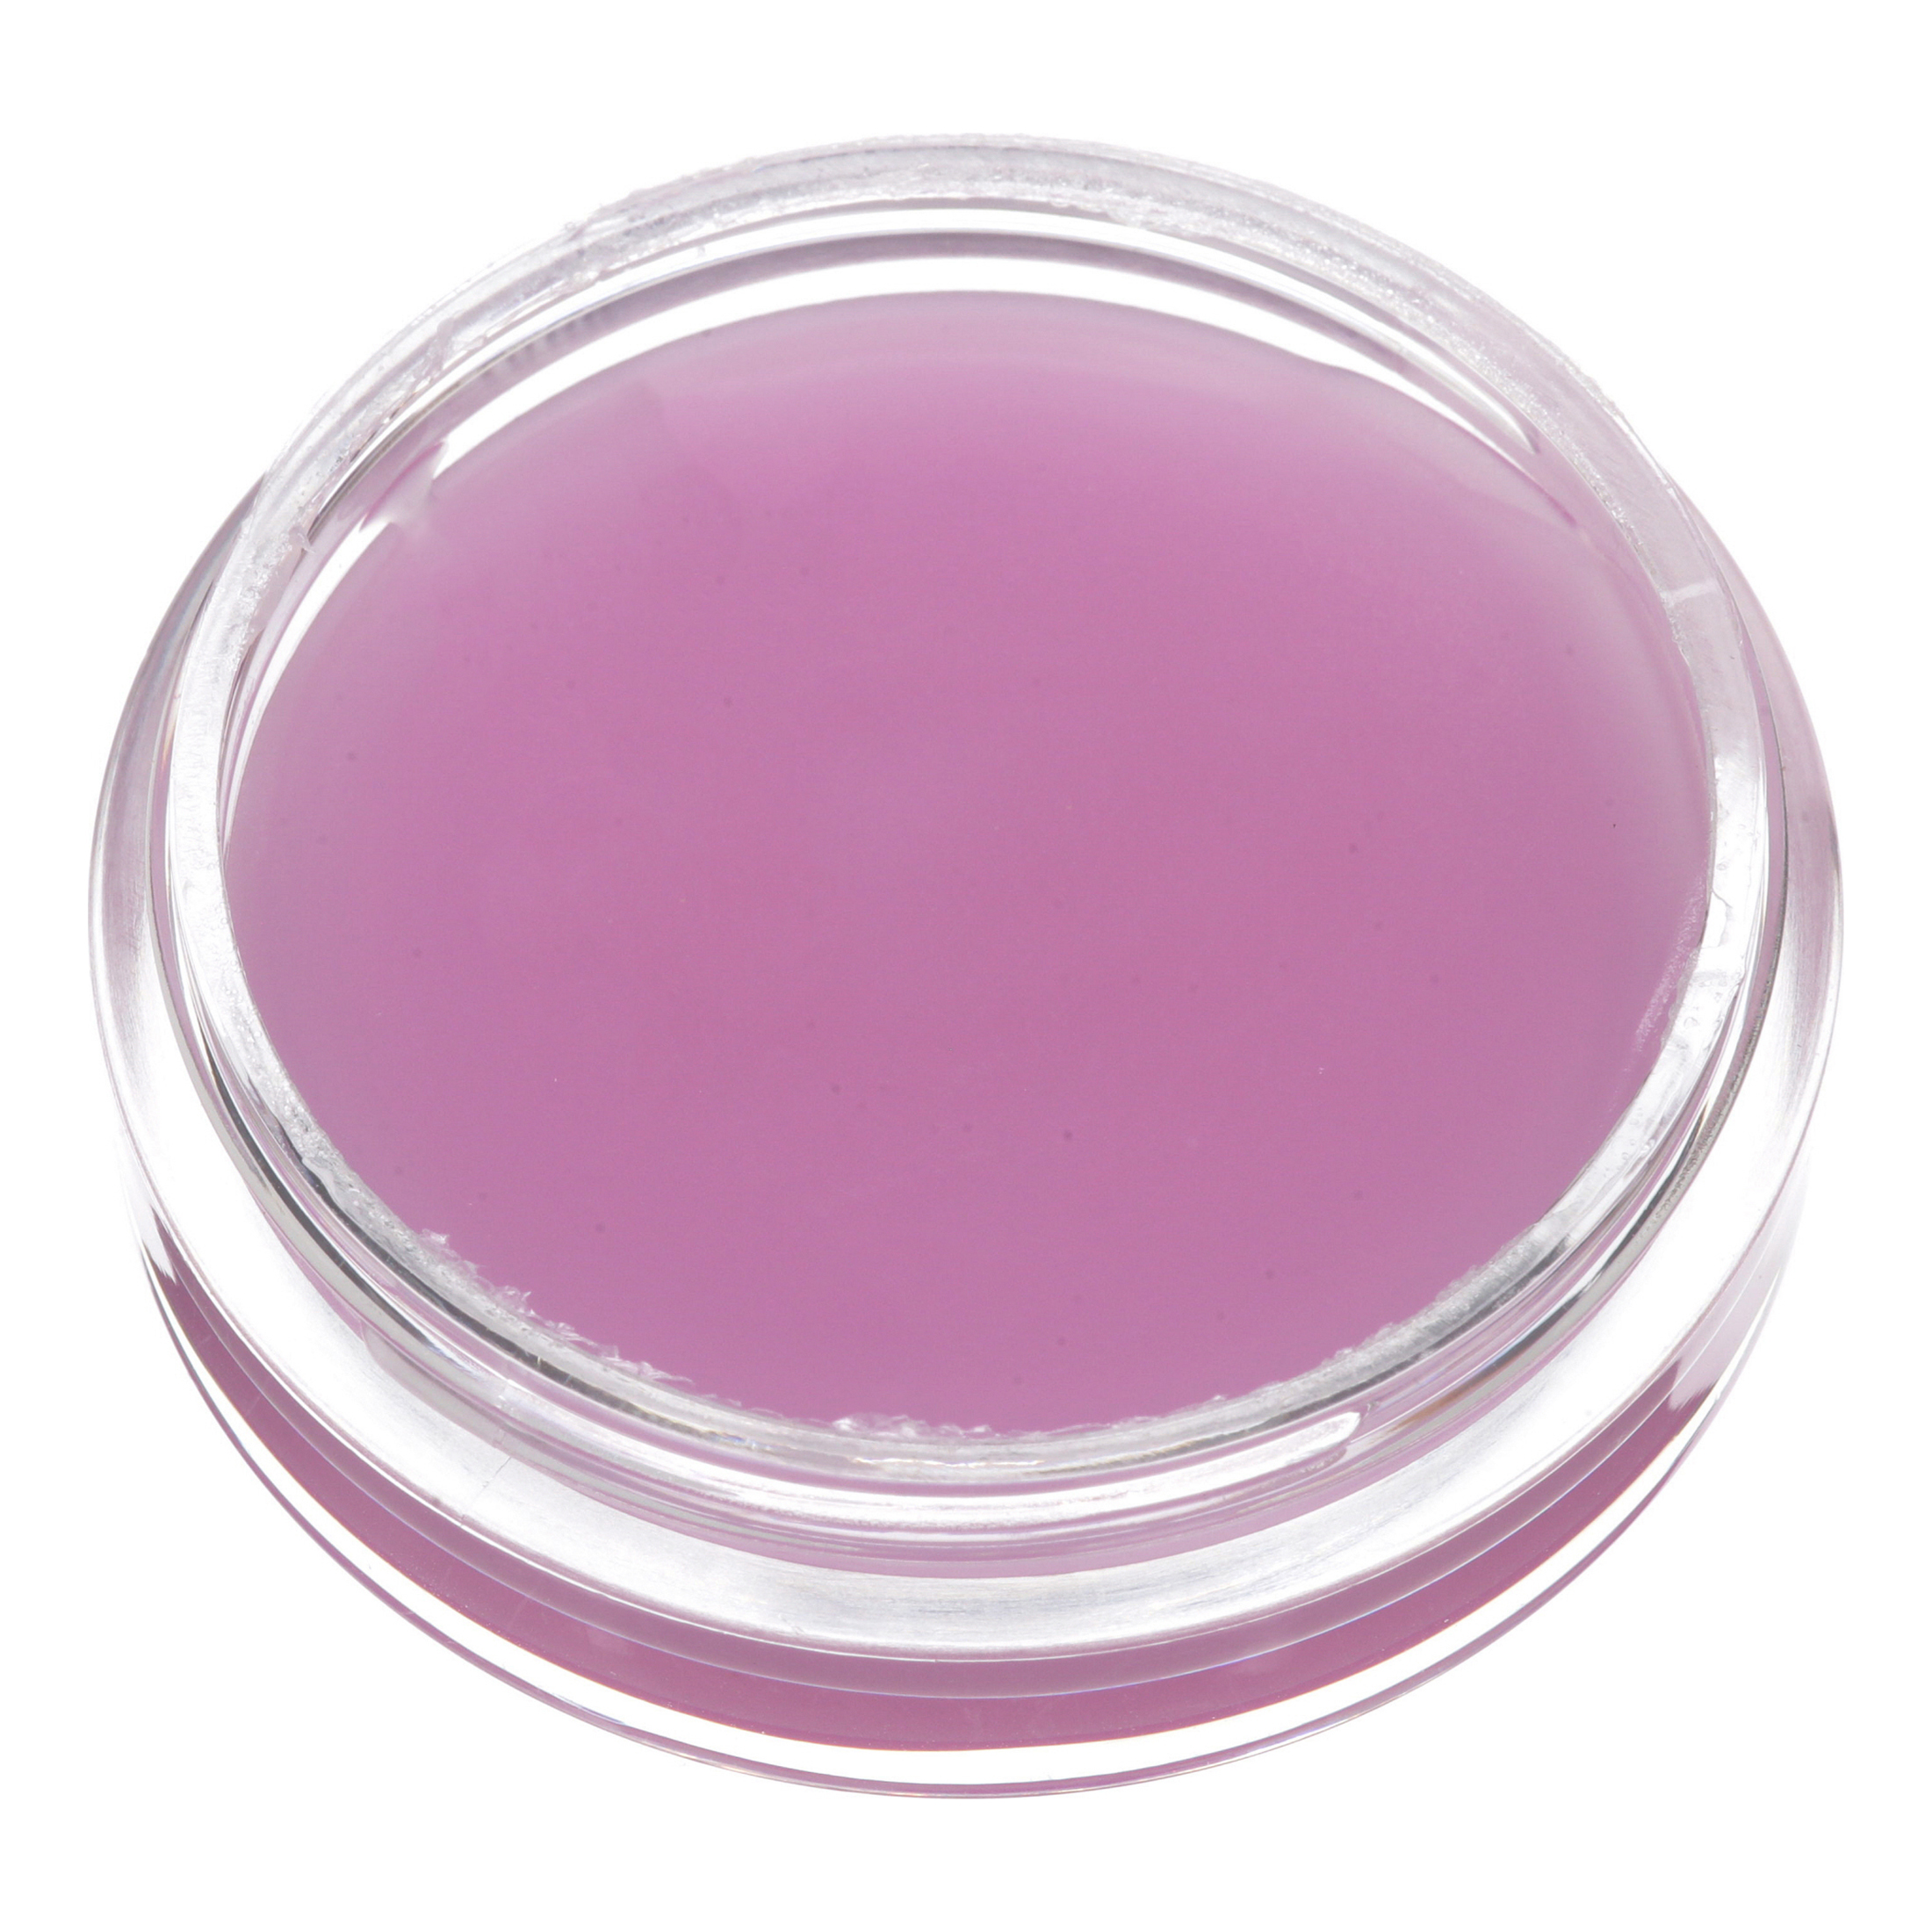 wet n wild Perfect Pout Sleeping Lip Mask, Lavender - image 5 of 8